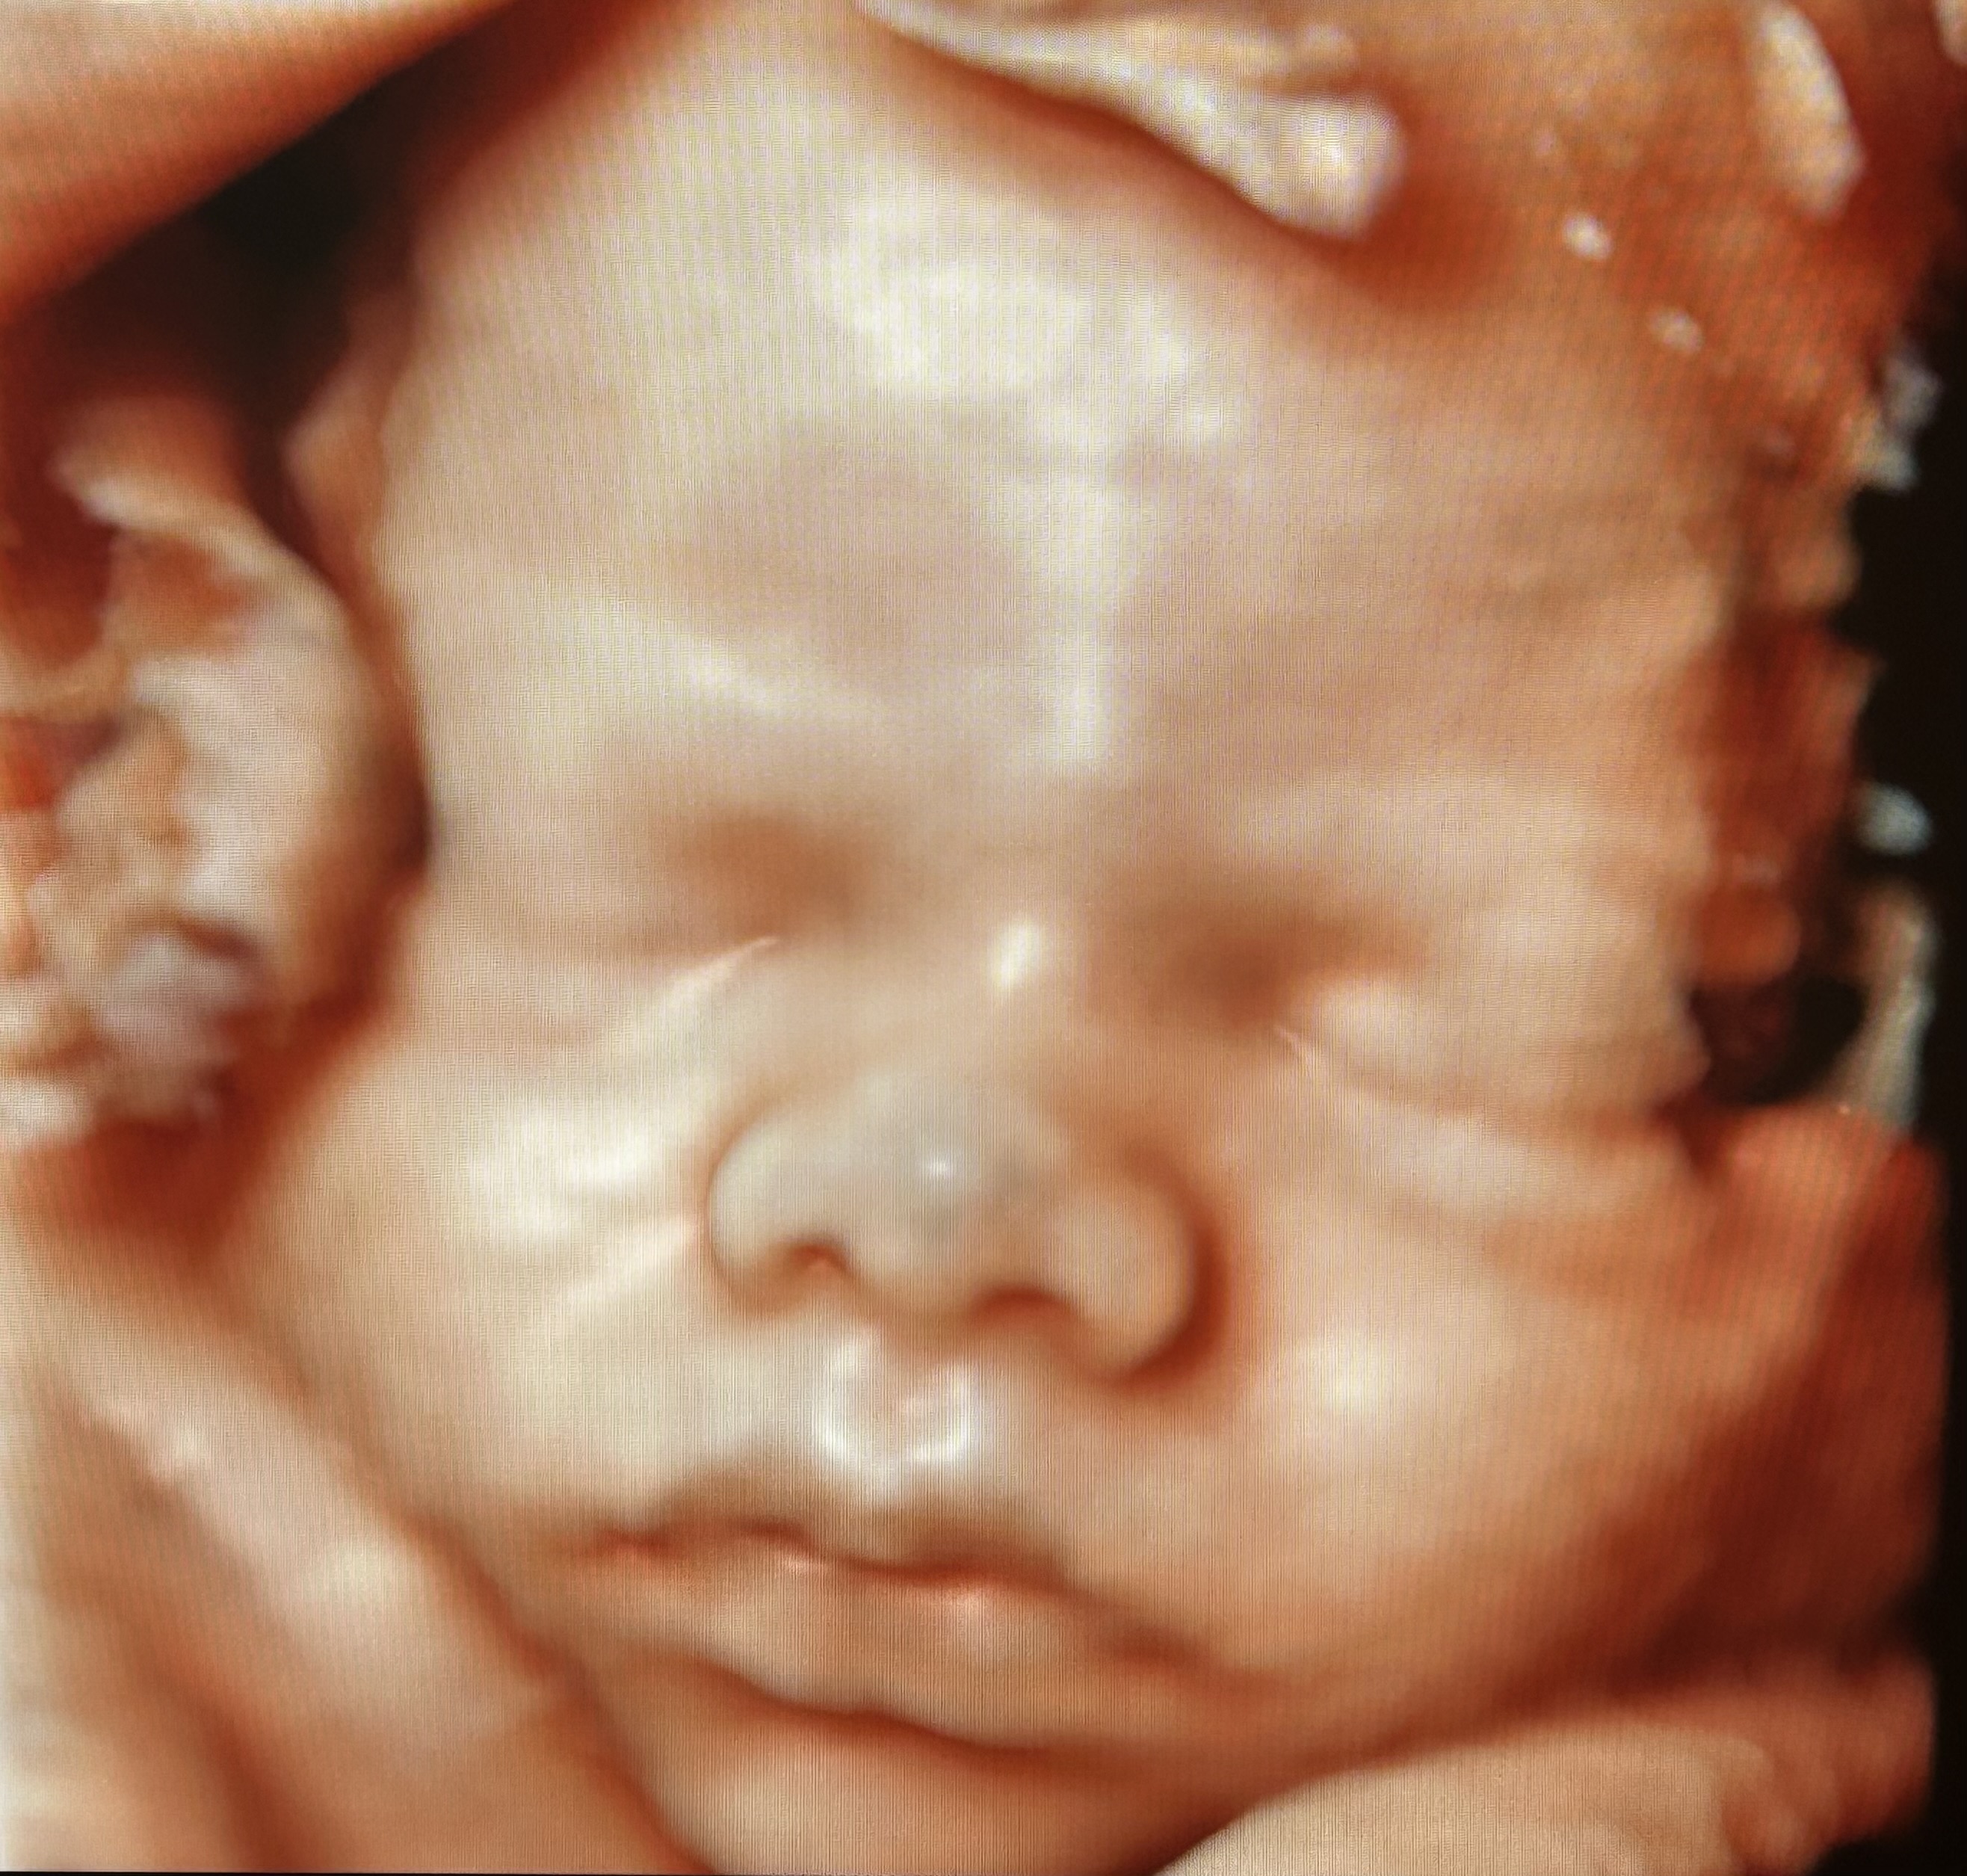 4D maternal ultrasound picture from the Voluson™ Expert 22 ultrasound machine